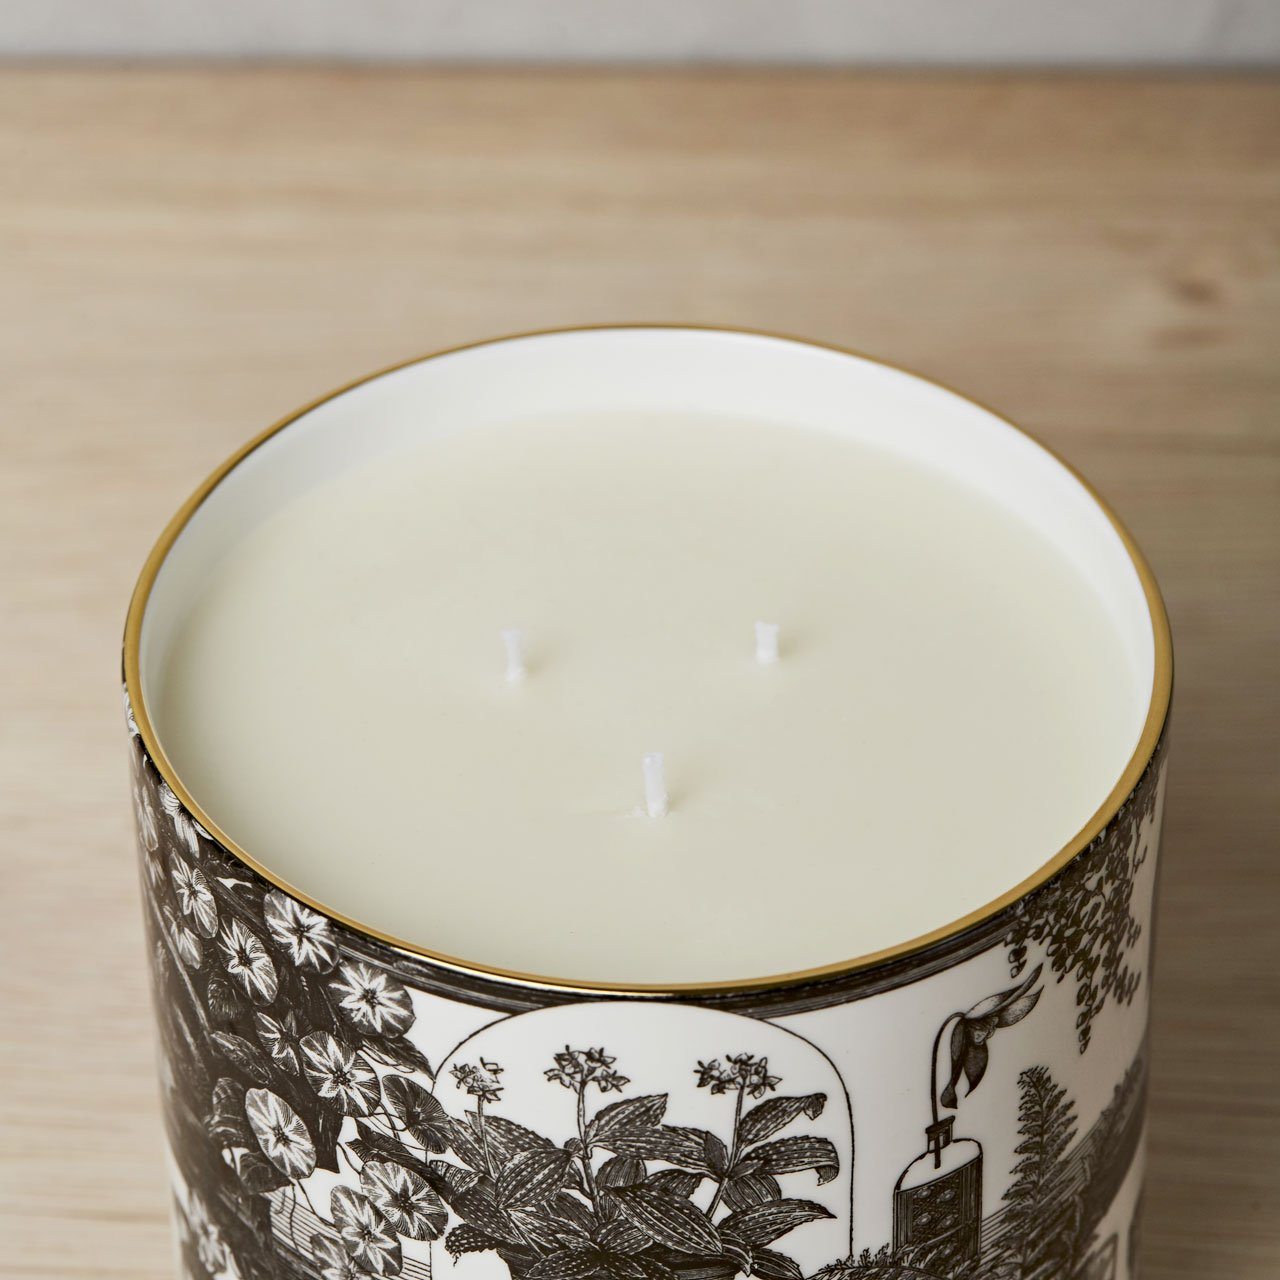 The Enchanted Forest 3 Wick Scented Ceramic Candle - Chase and Wonder - Proudly Made in Britain